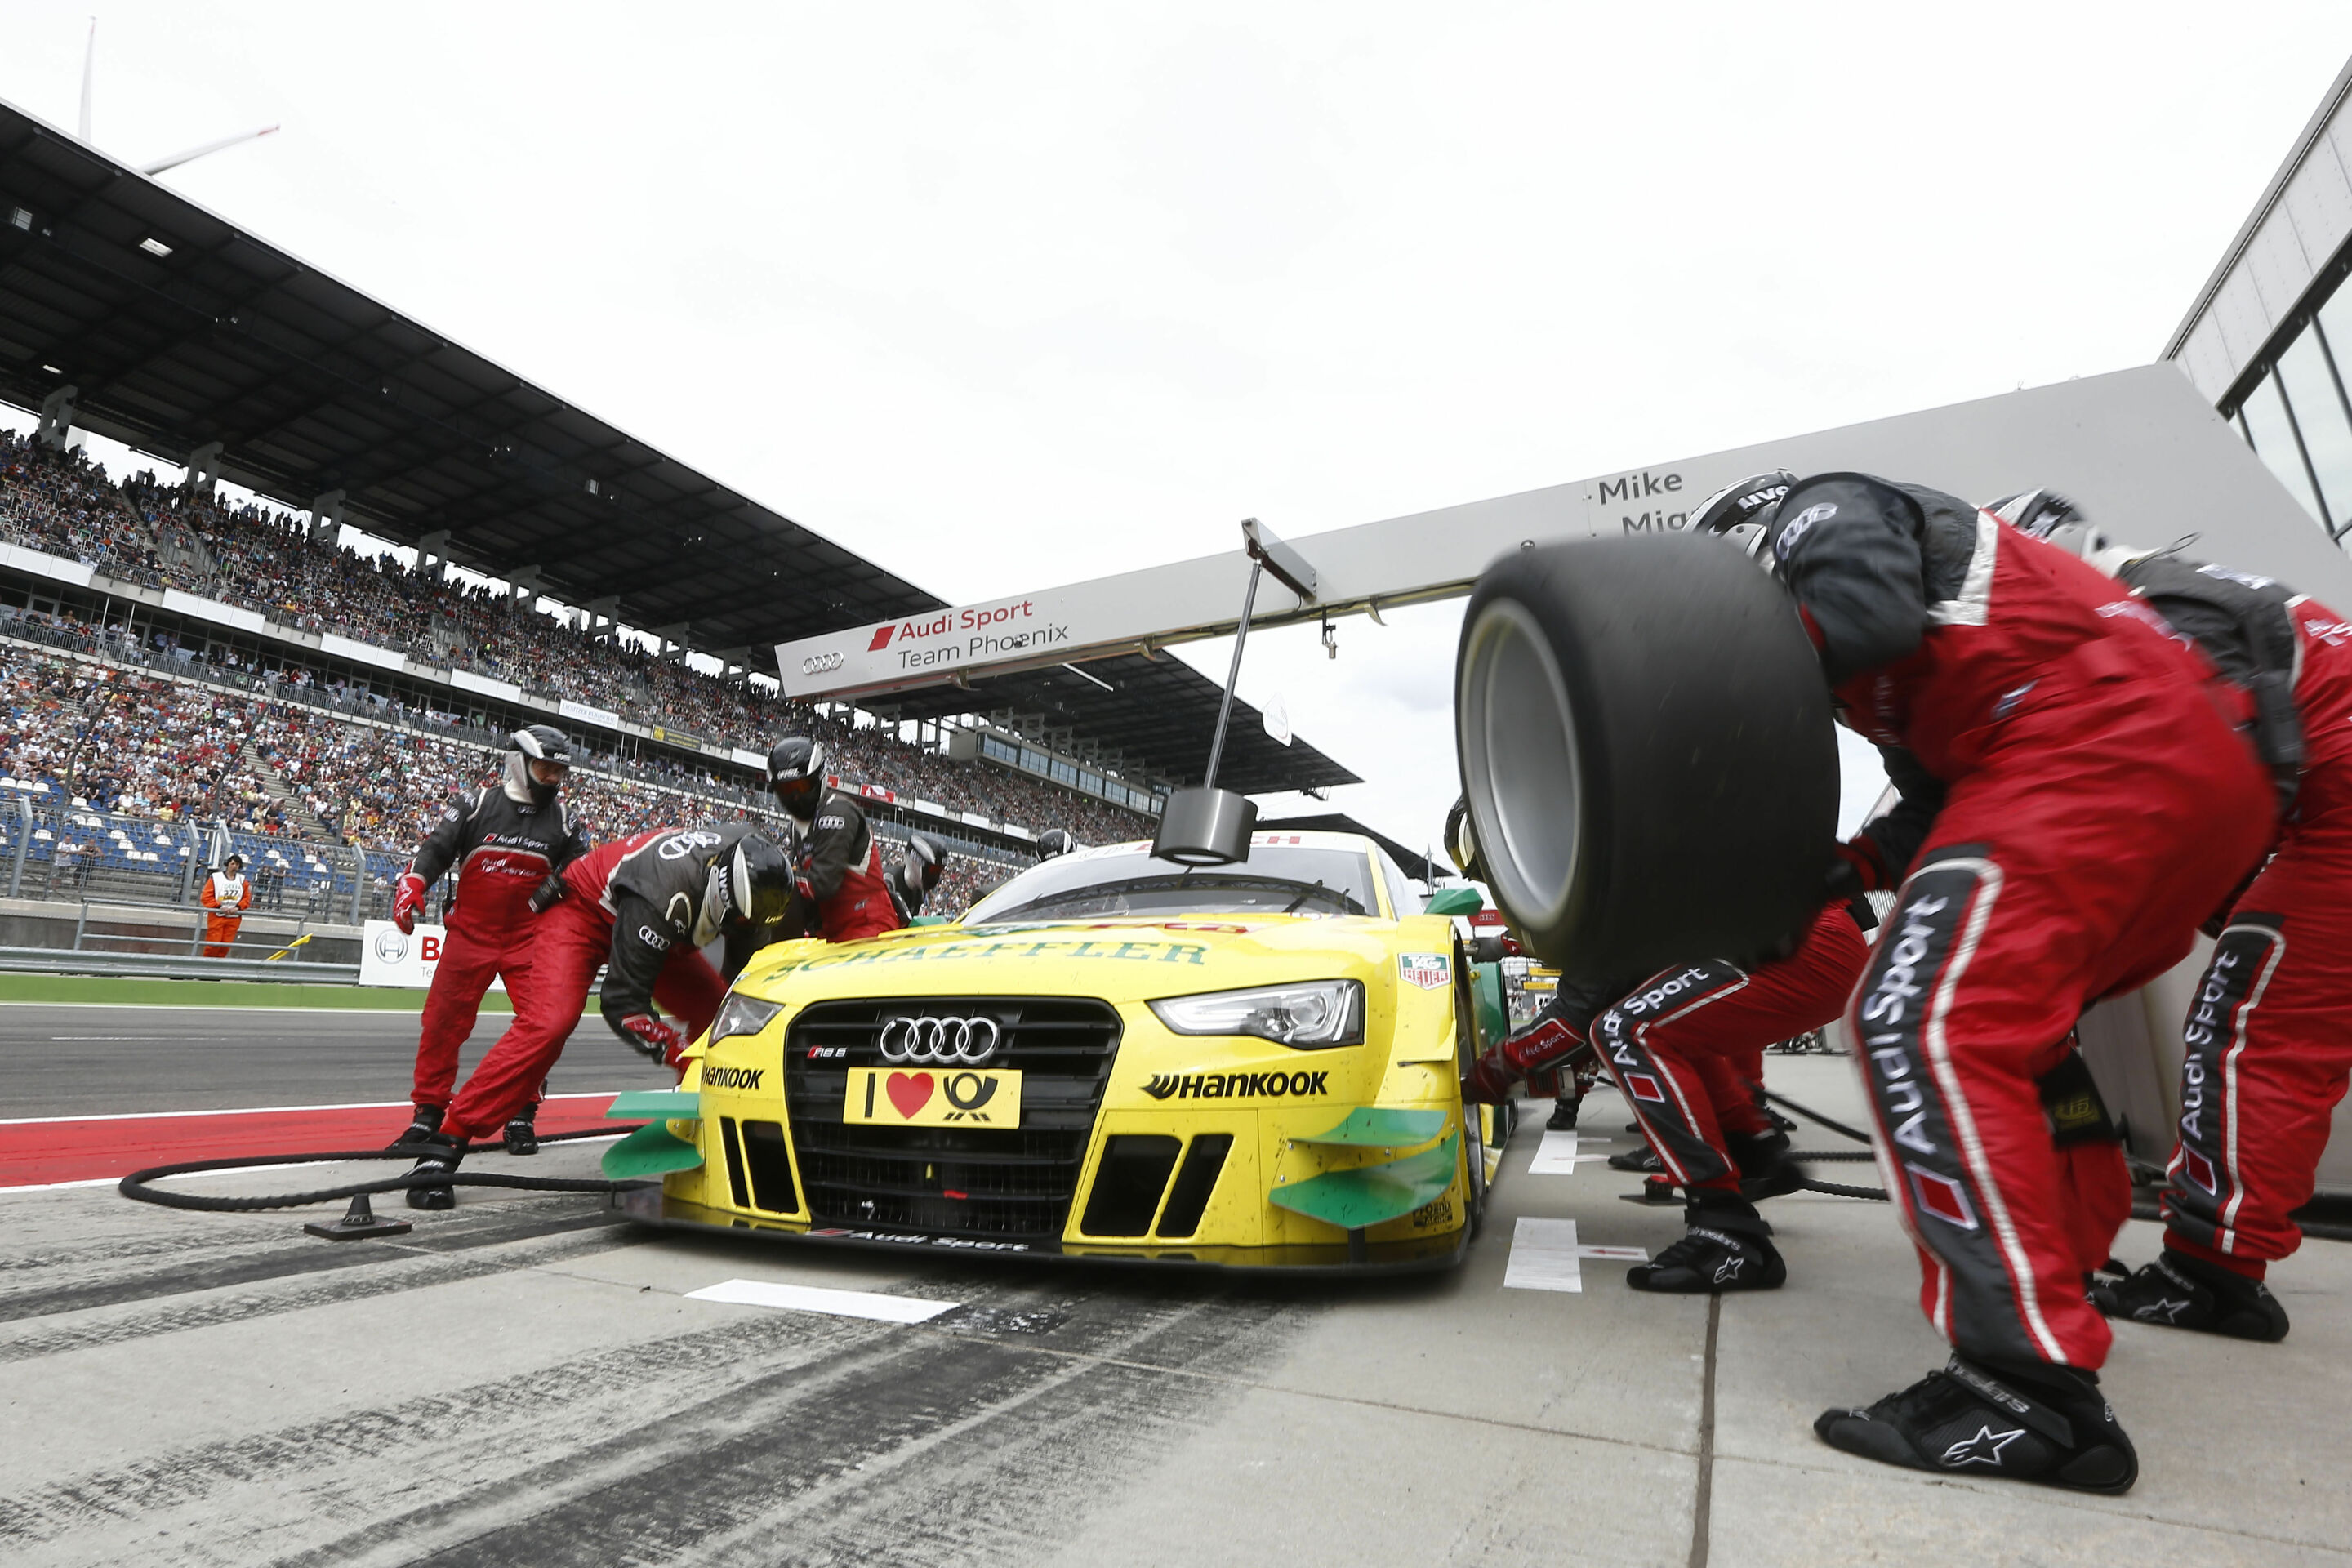 Eager anticipation of DTM home round at Norisring